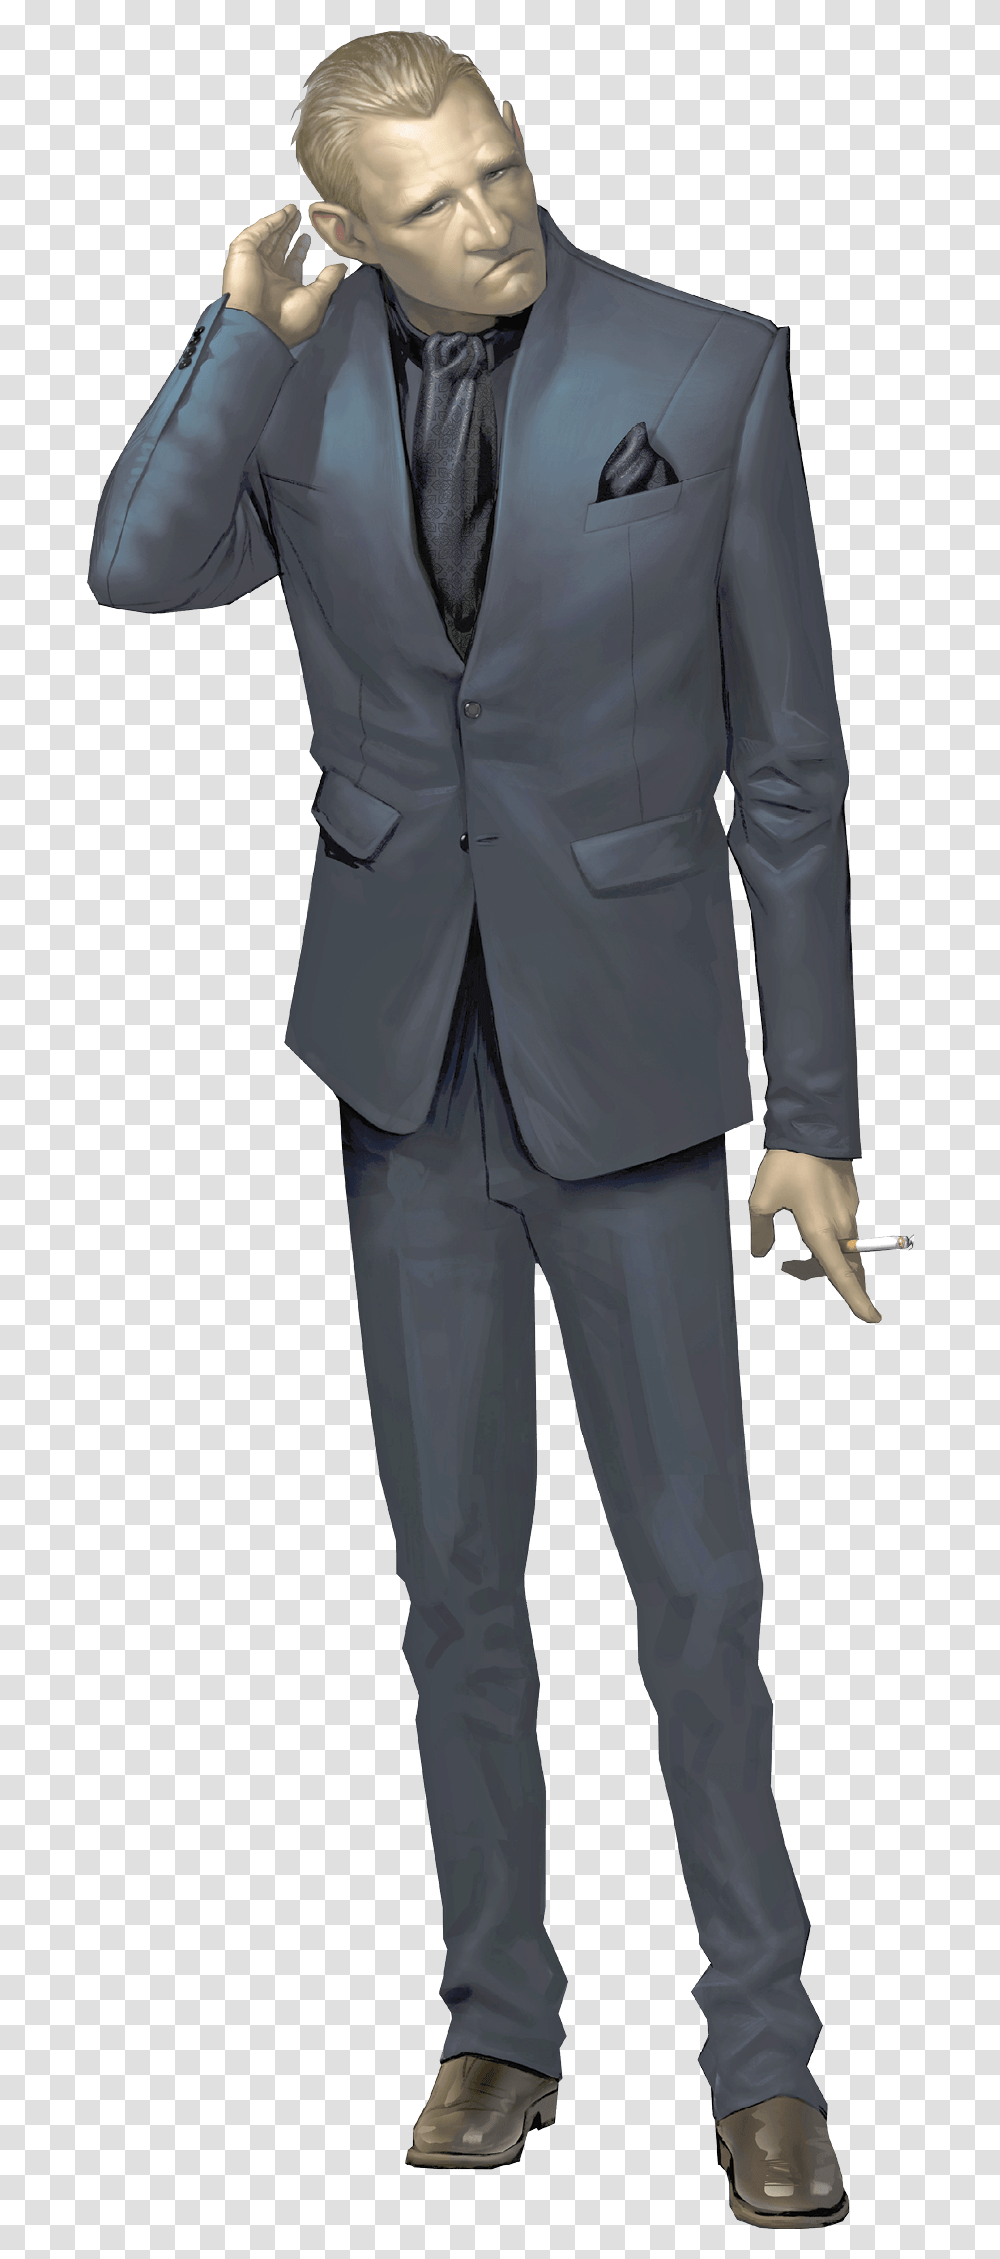 People And Places Deus Ex Mankind Divided Eguide Tuxedo, Clothing, Suit, Overcoat, Person Transparent Png